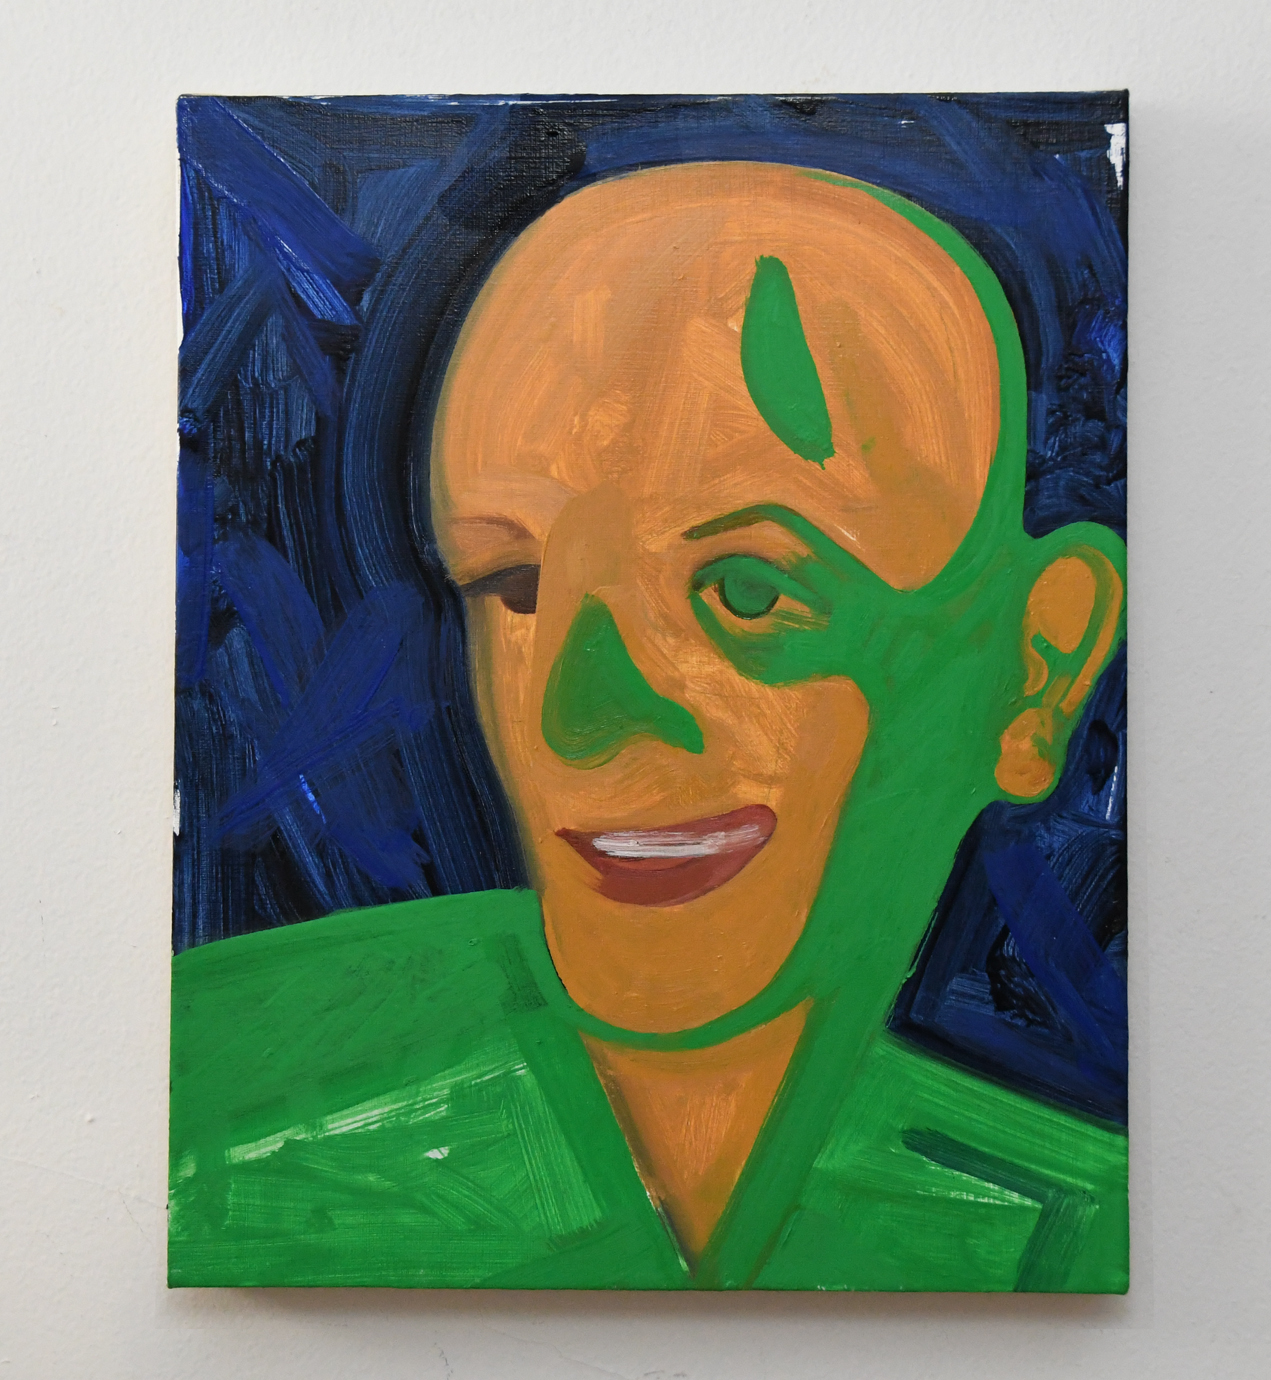 A portrait of Alex Katz by Emma McMillan commissioned by Cultured. McMillan has a side practice of portrait commissions.